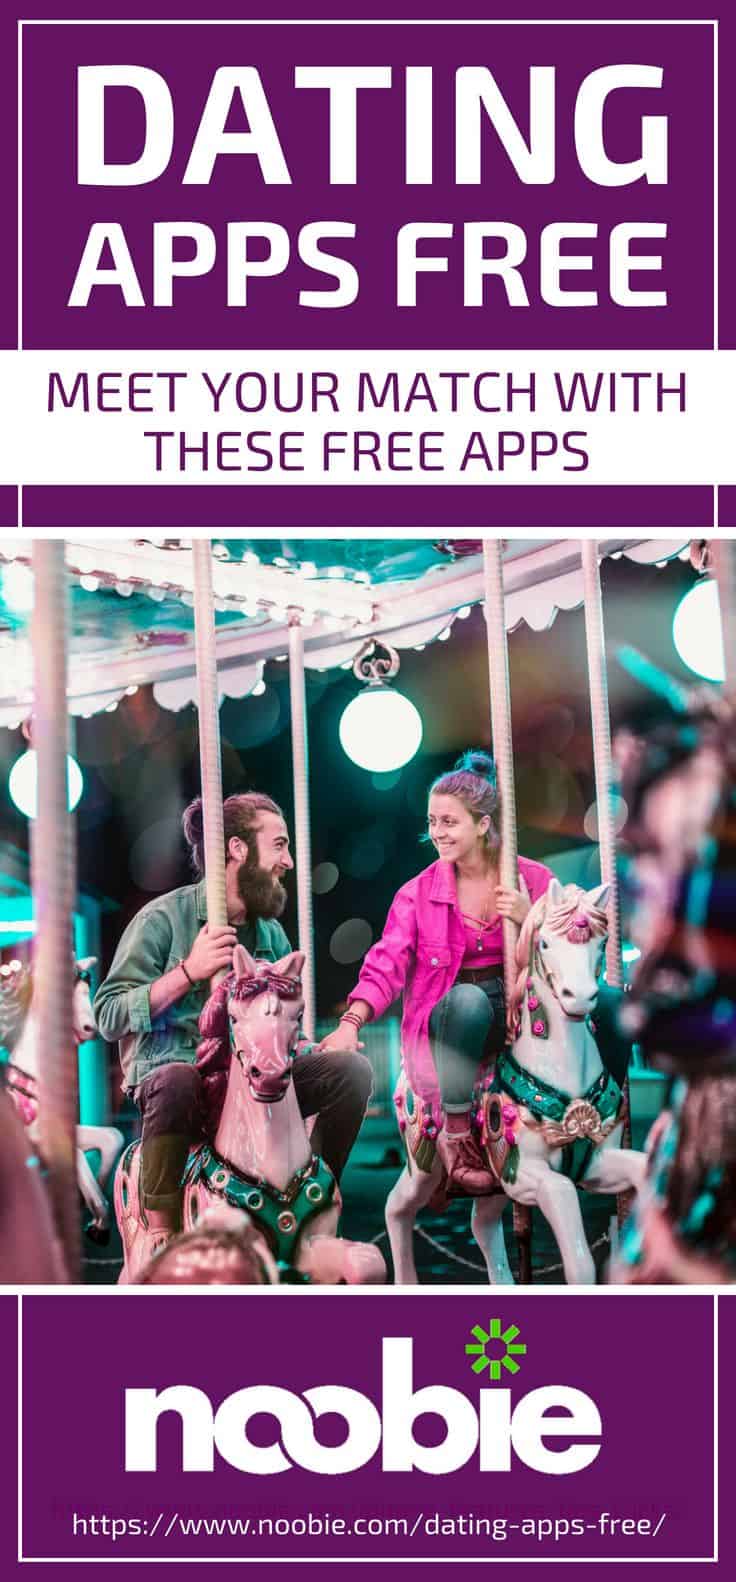 Dating Apps Free | Meet Your Match With These Free Apps | https://noobie.com/dating-apps-free/